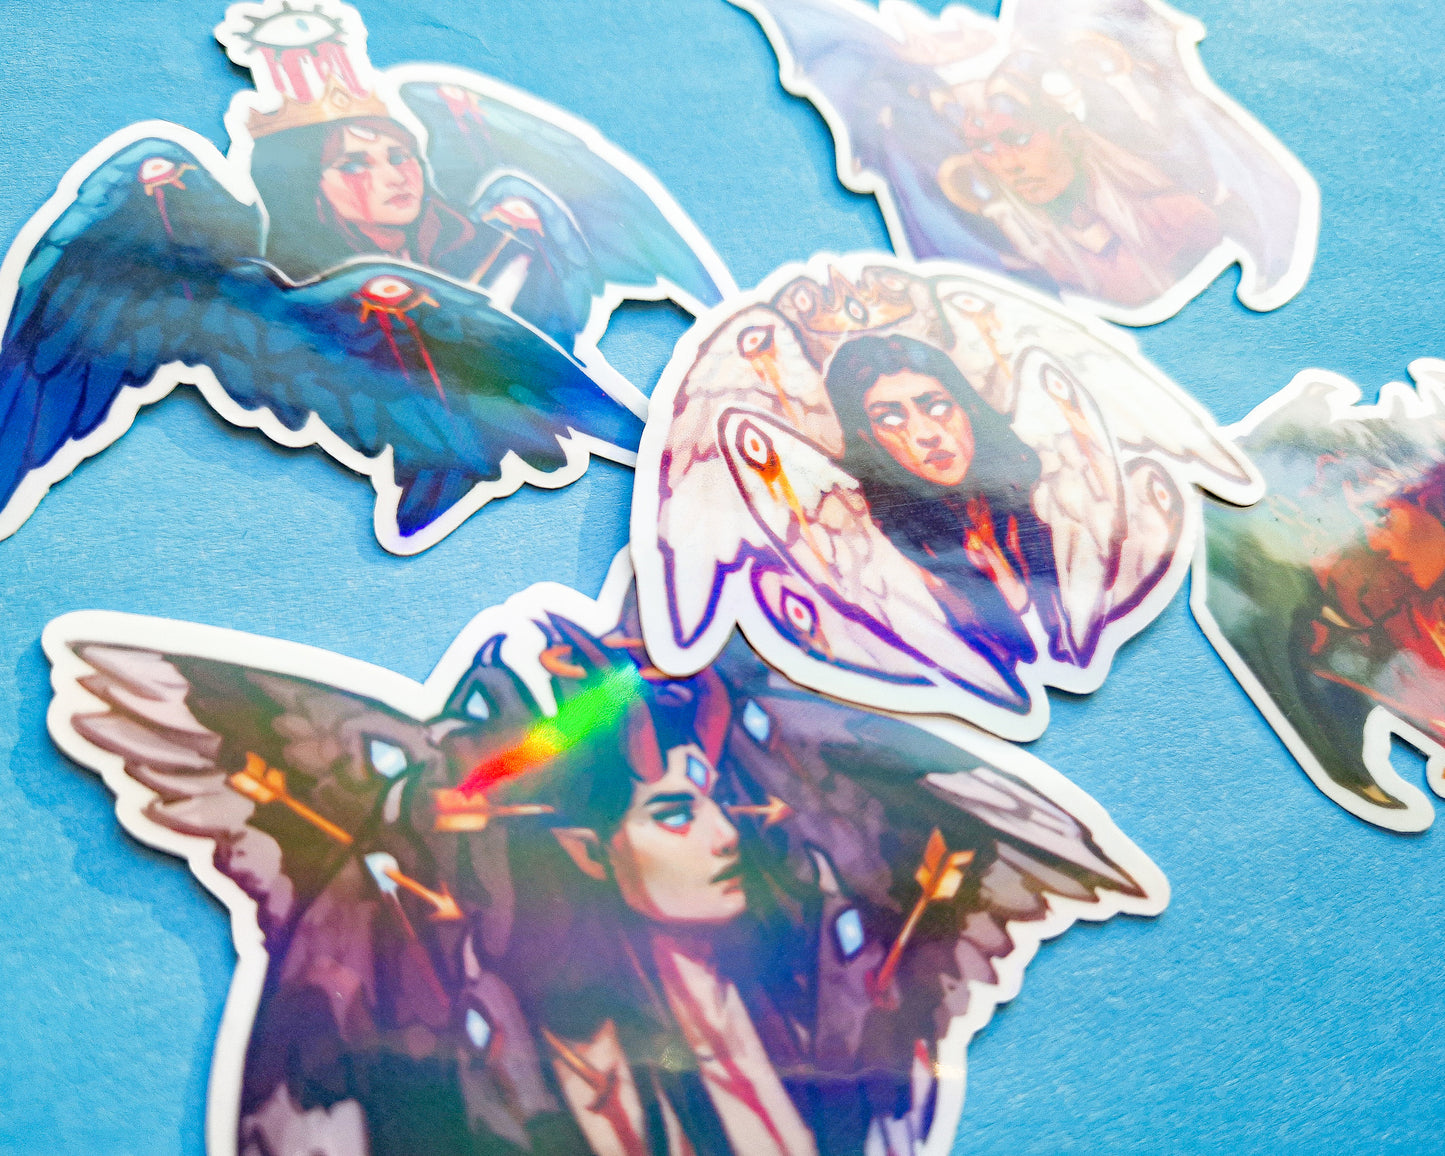 Angels and Demons Sticker Pack - 5 Holographic Vinyl Stickers